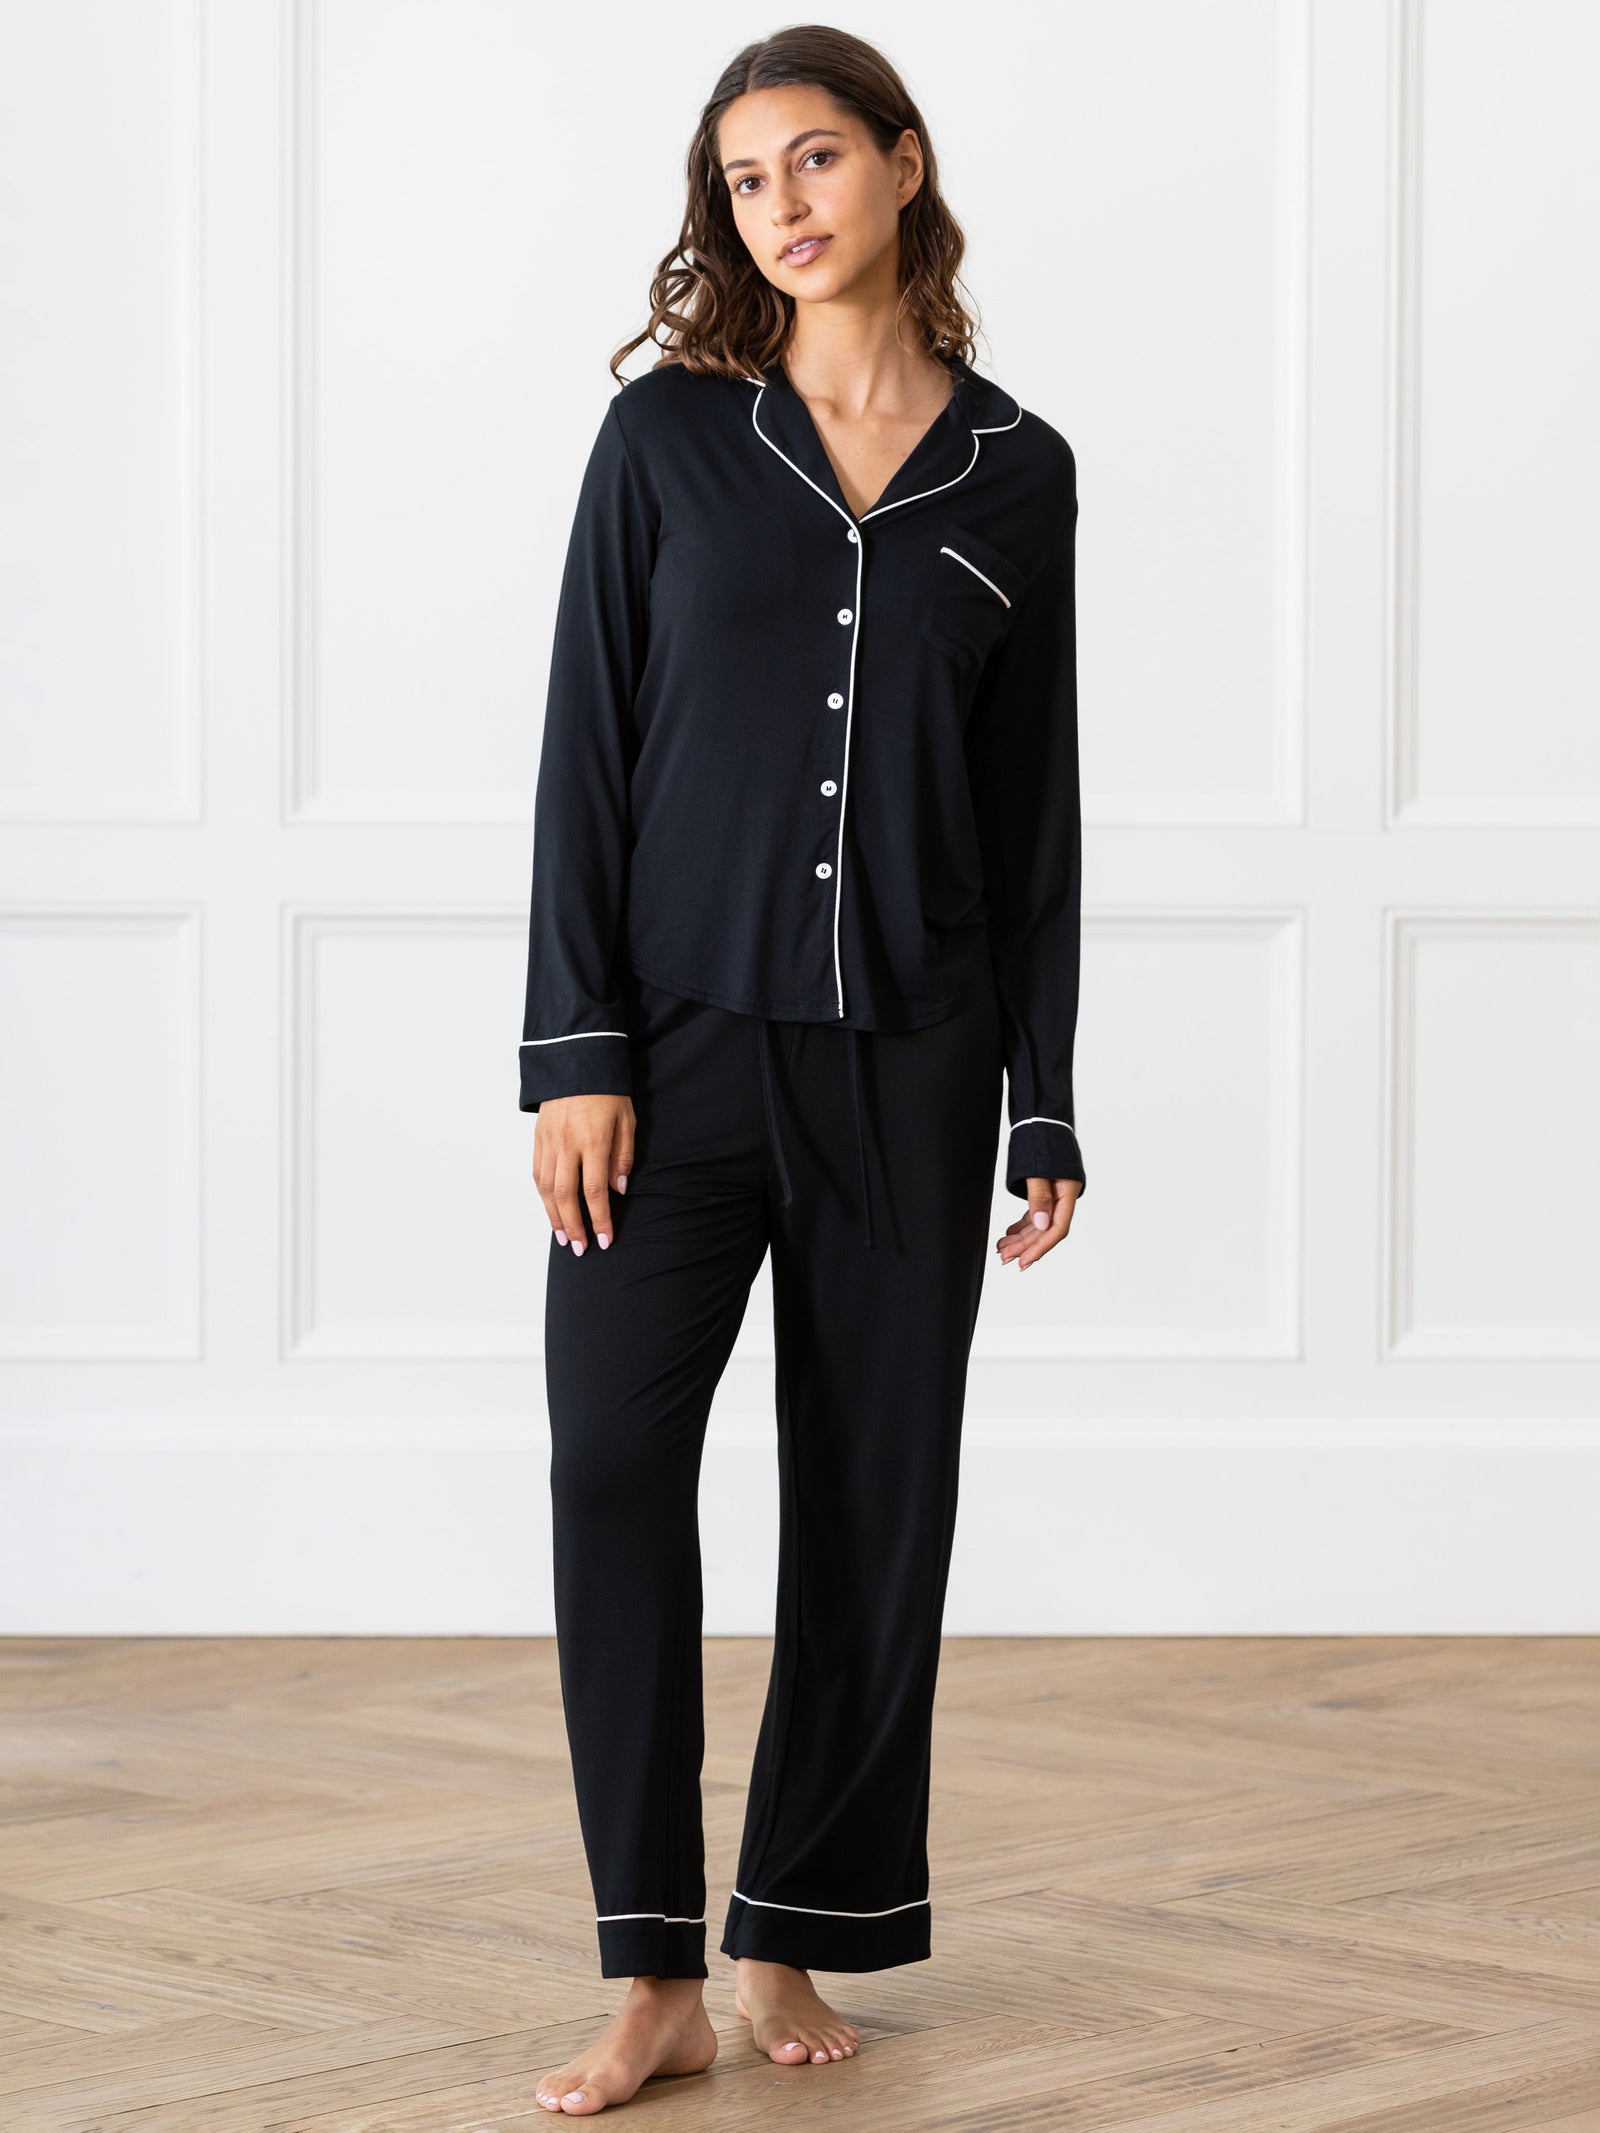 Black Long Sleeve Pajama Set modeled by a woman. The photo was taken in a light setting, showing off the colors and lines of the pajamas. 